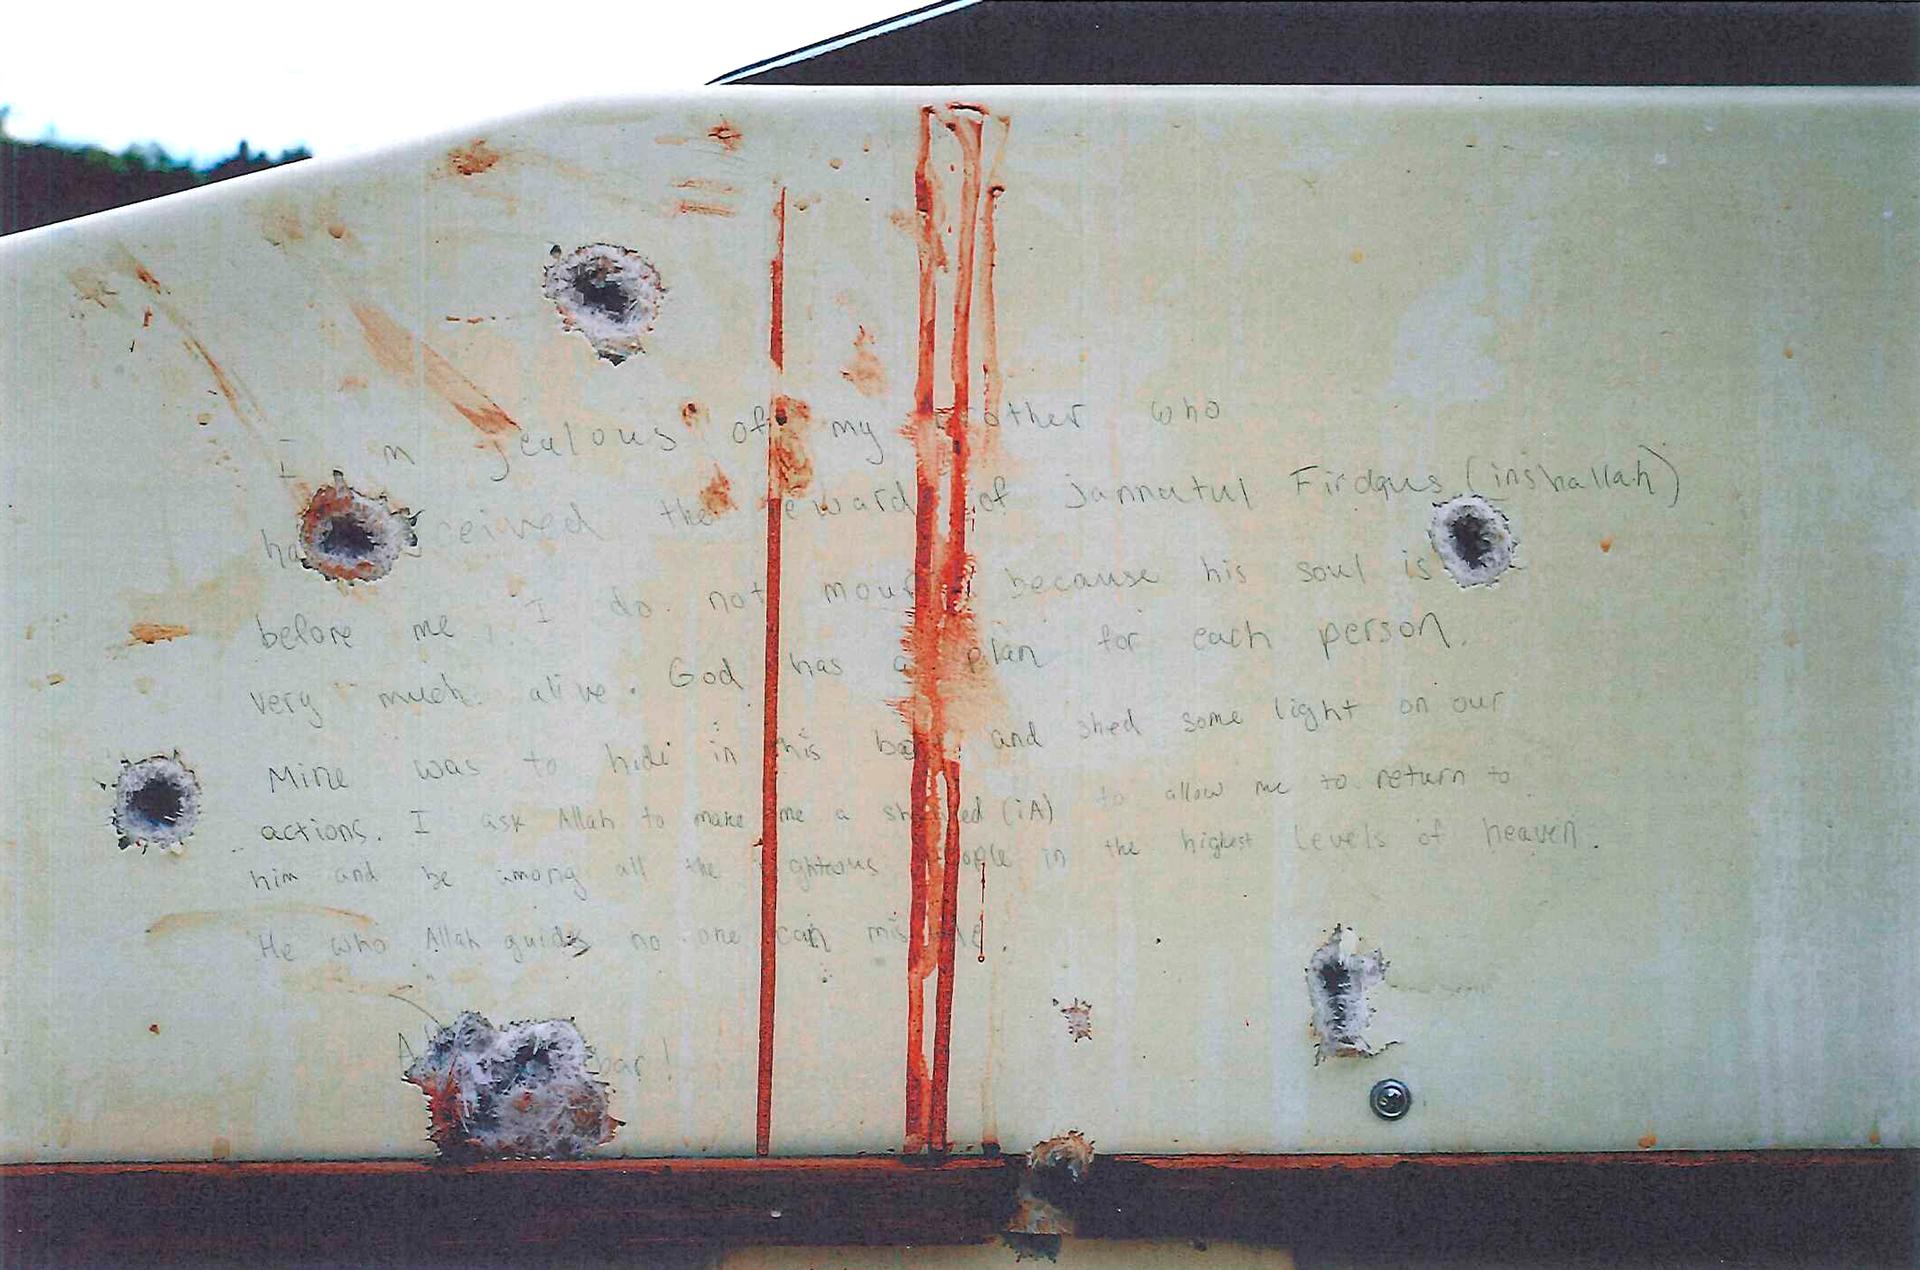 A blood-stained message prosecutors say Boston Marathon bomber Dzhokhar Tsarnaev wrote on the inside of a boat. The undated photo was presented as evidence to jurors at Tsarnaev's trial in Boston.